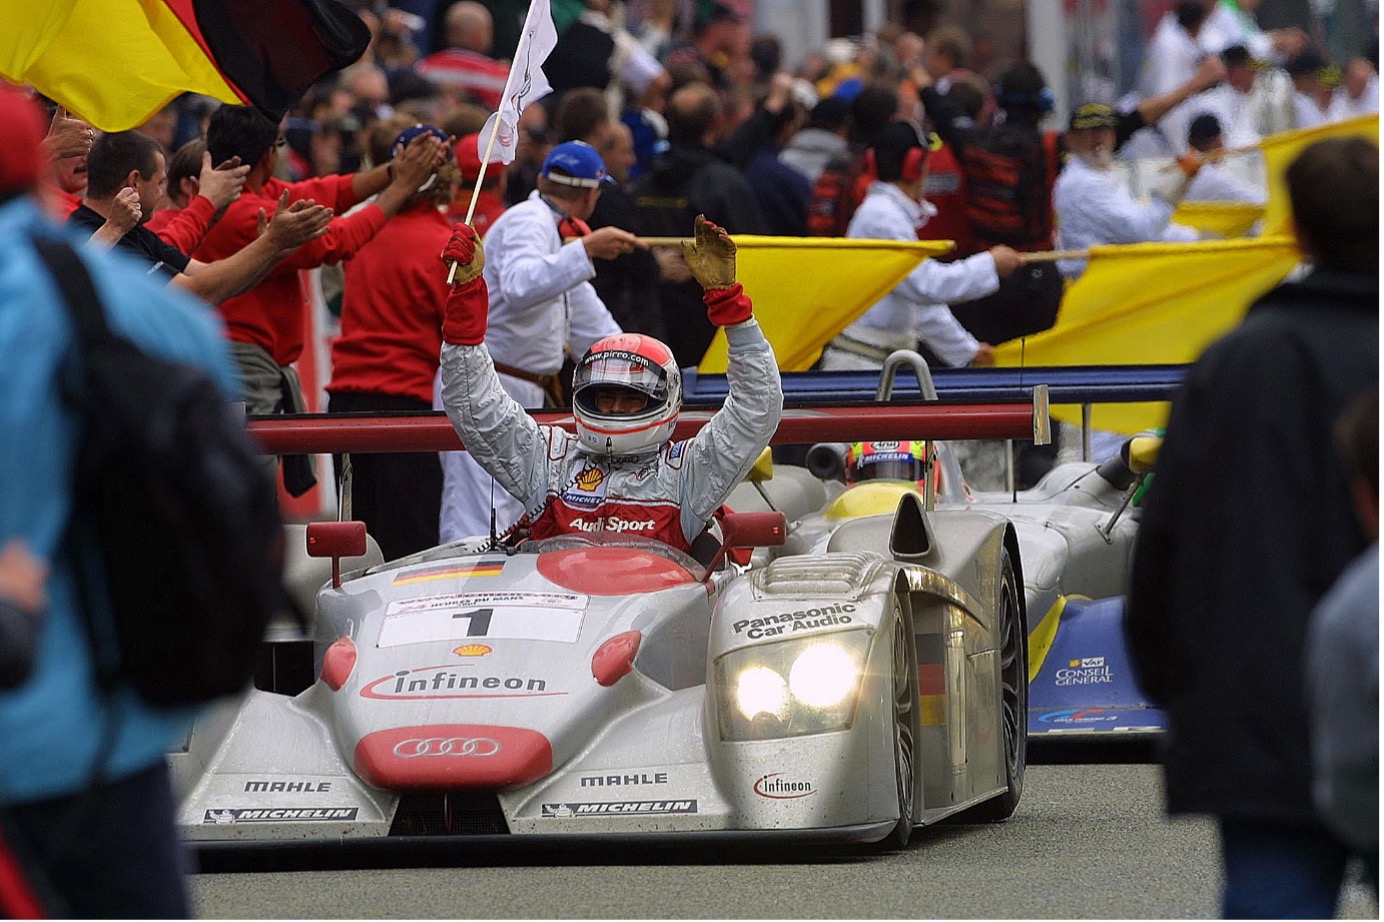 Emanuele Pirro won Le Mans five times with Audi. Image: Supplied